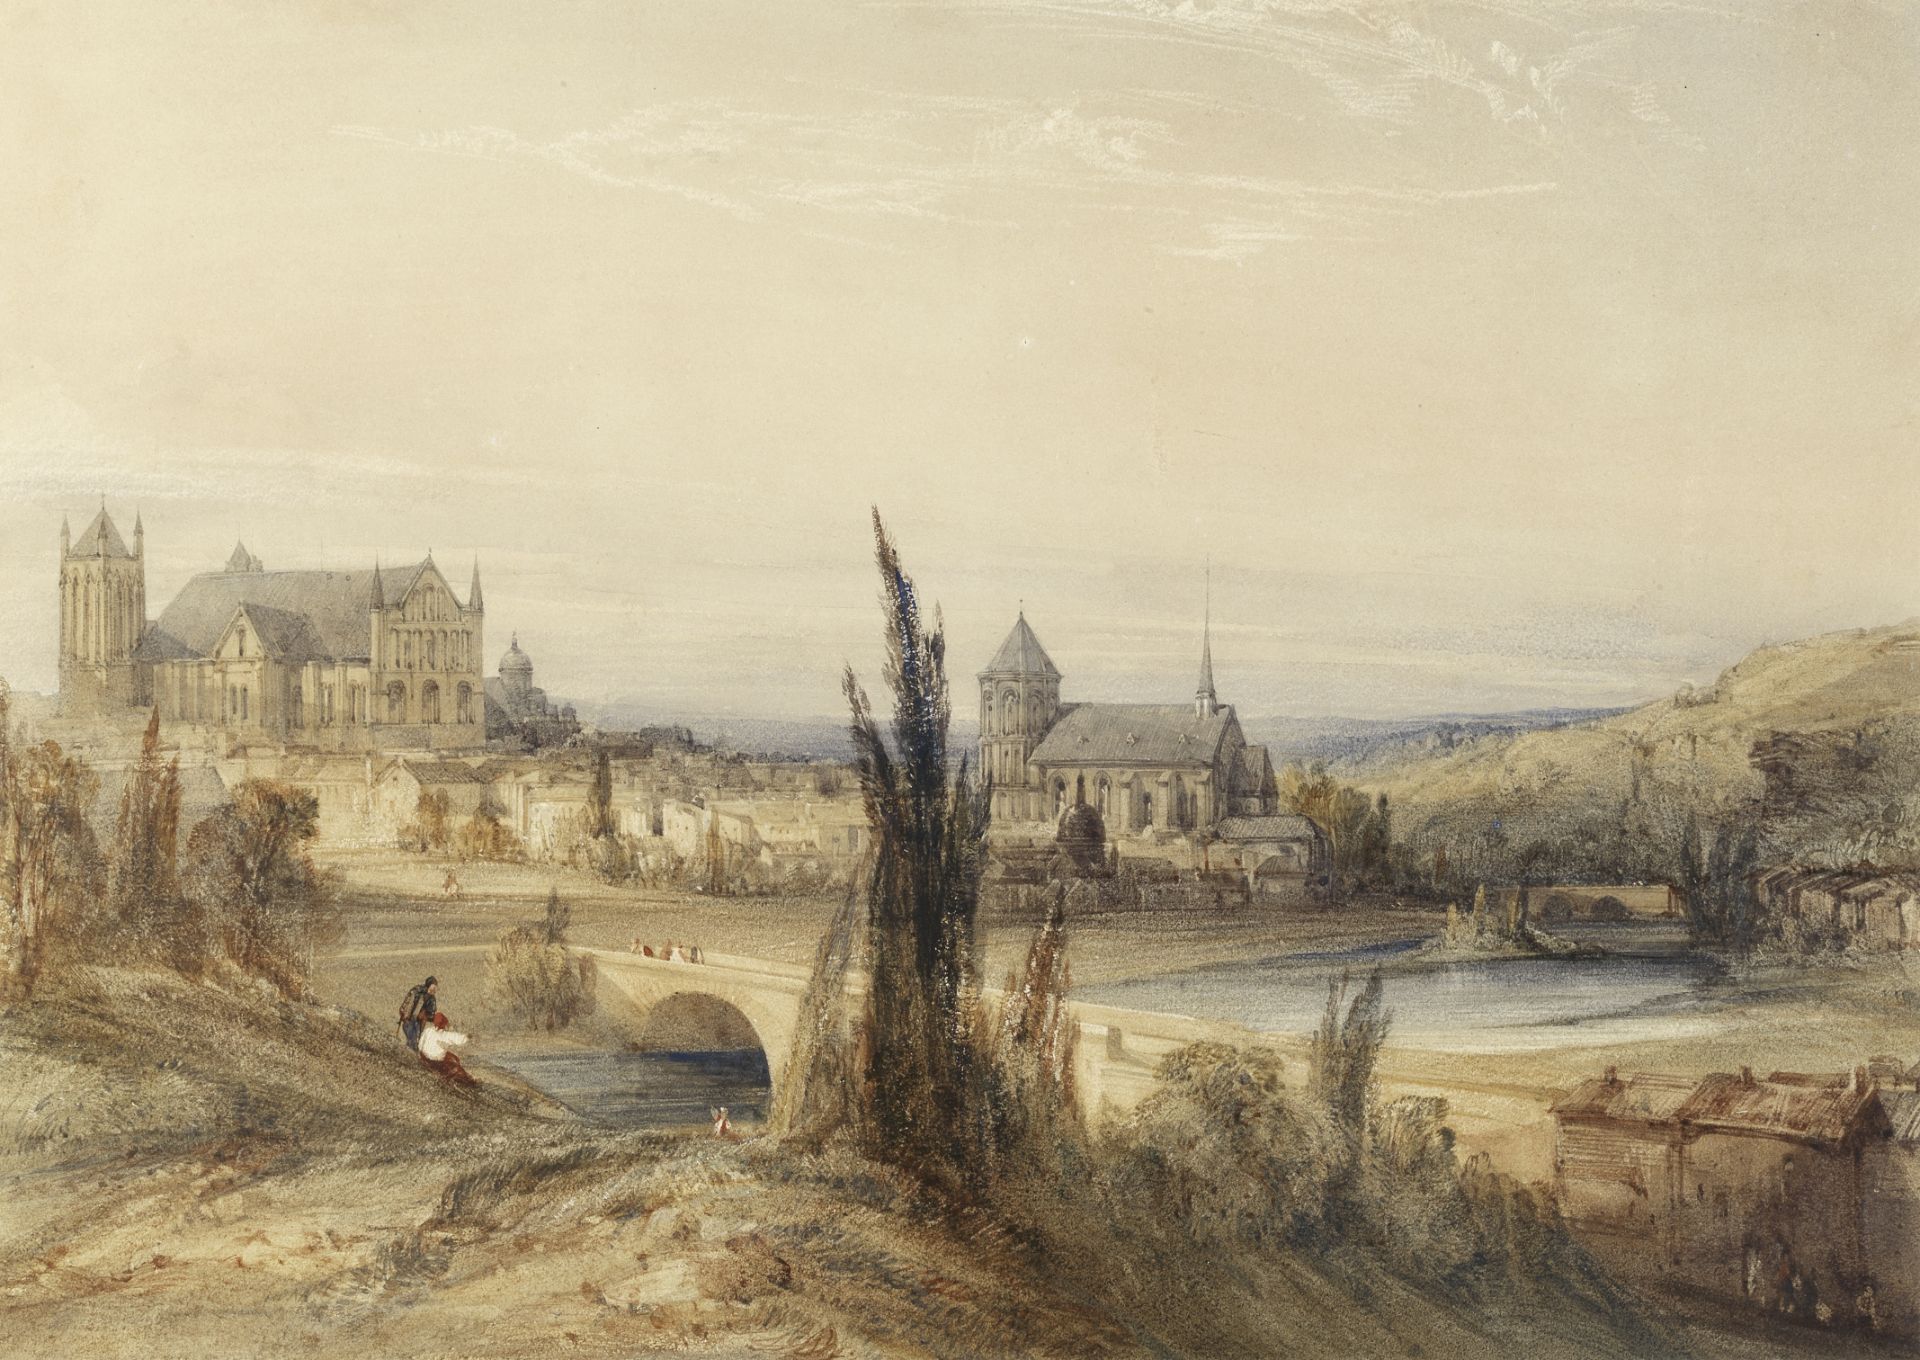 William Callow, RWS (British, 1812-1908) The town of Poitiers, France